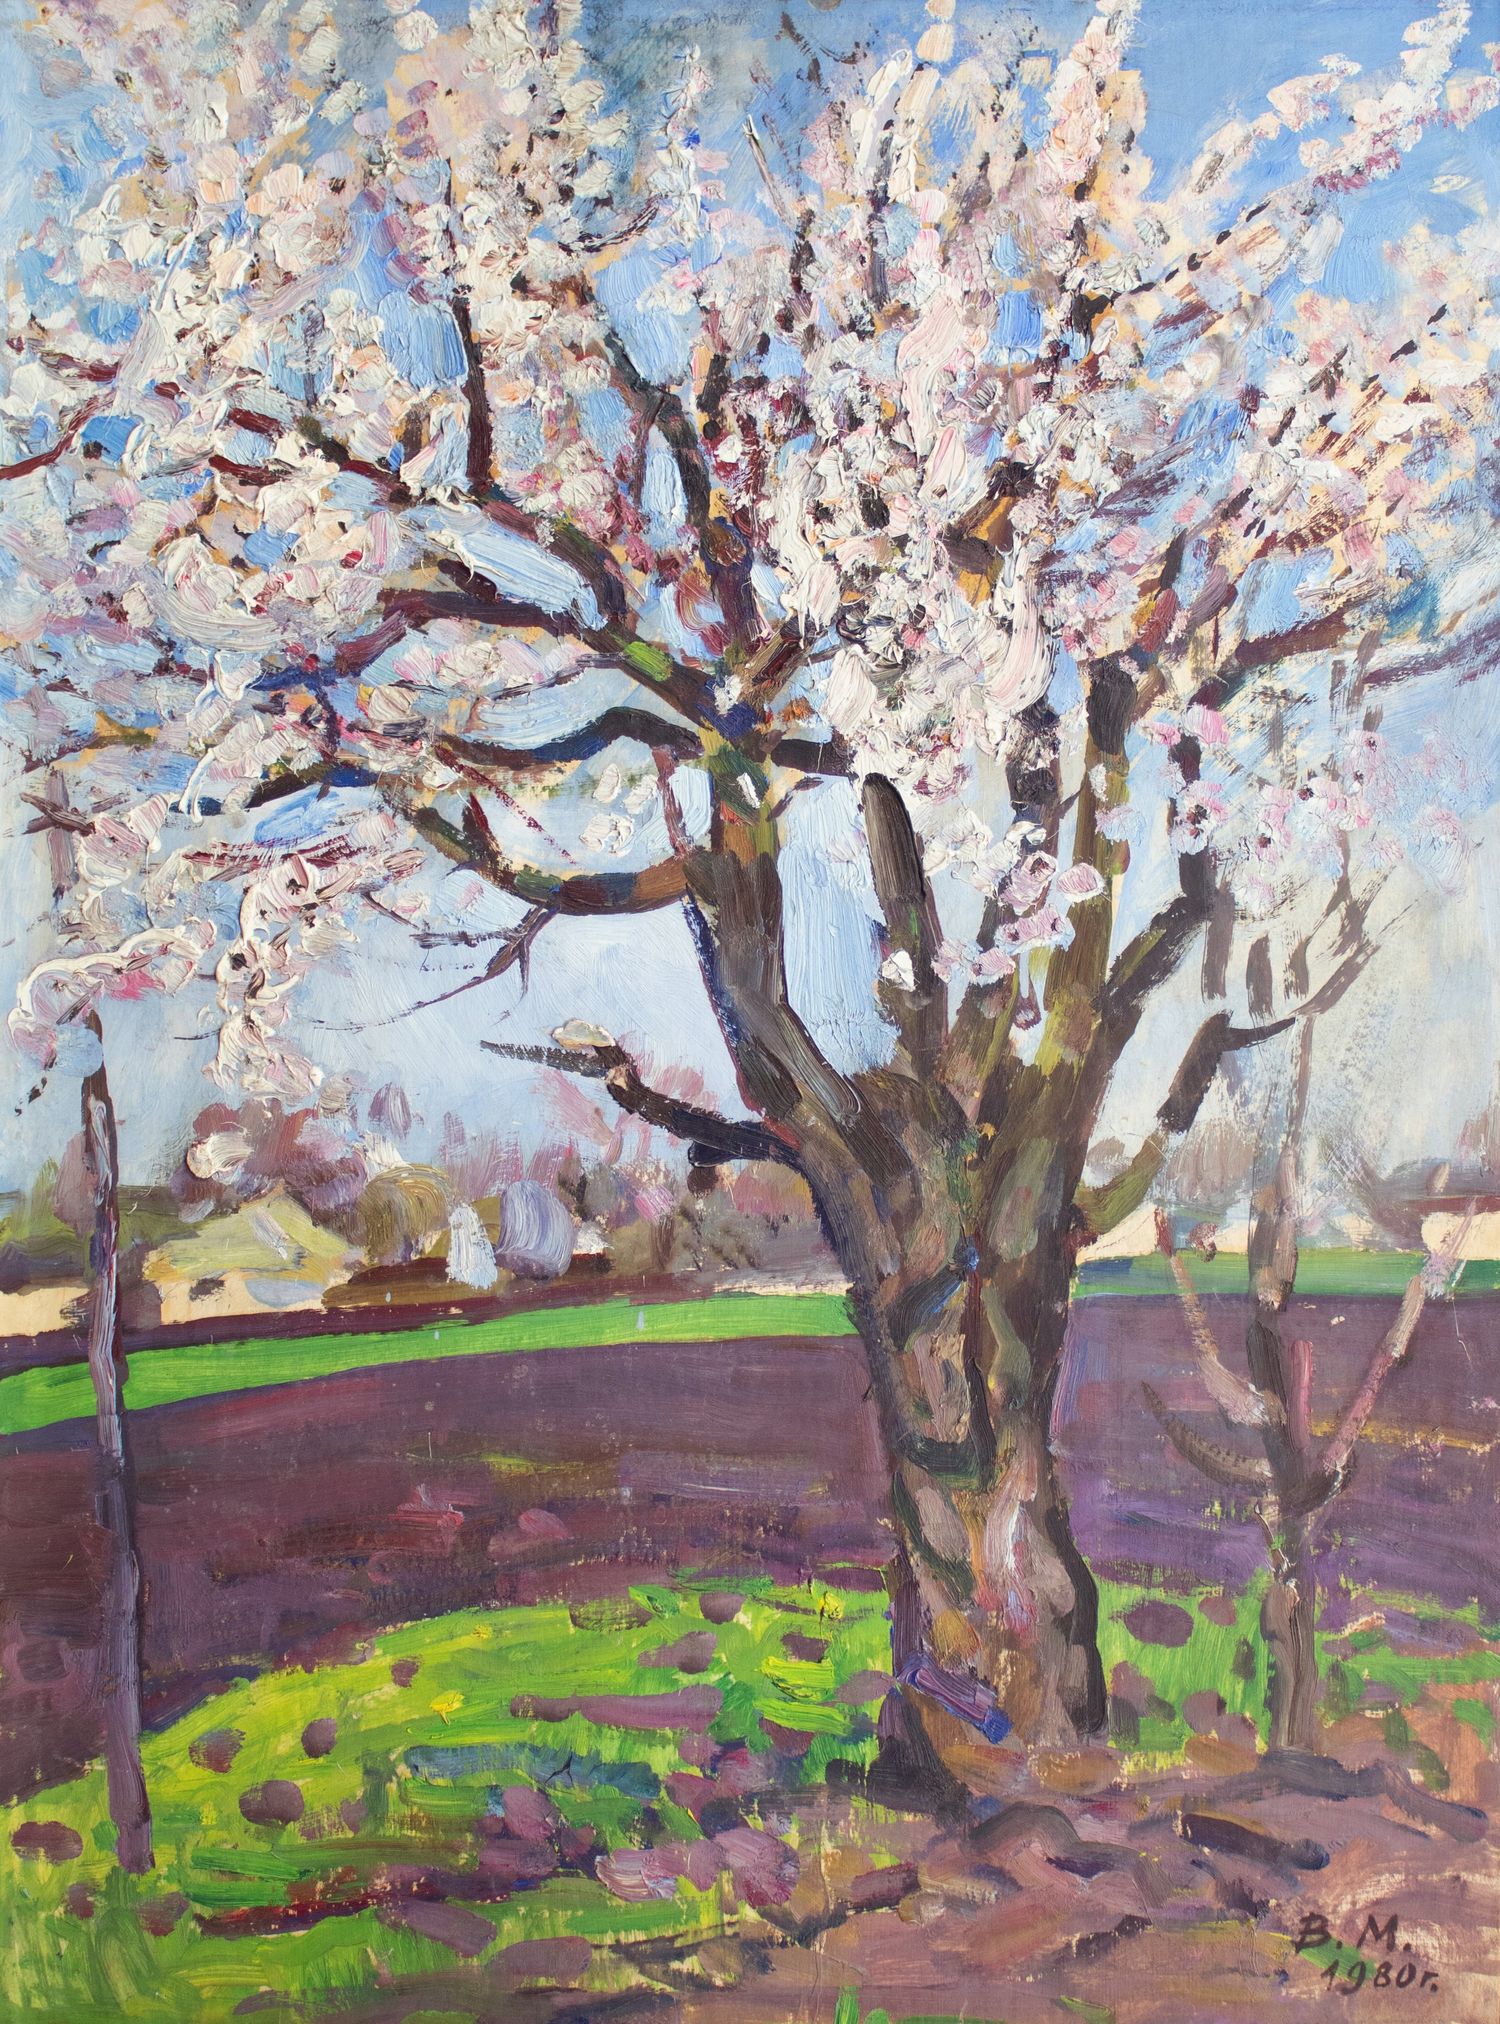 "Flowering tree / in the early spring"